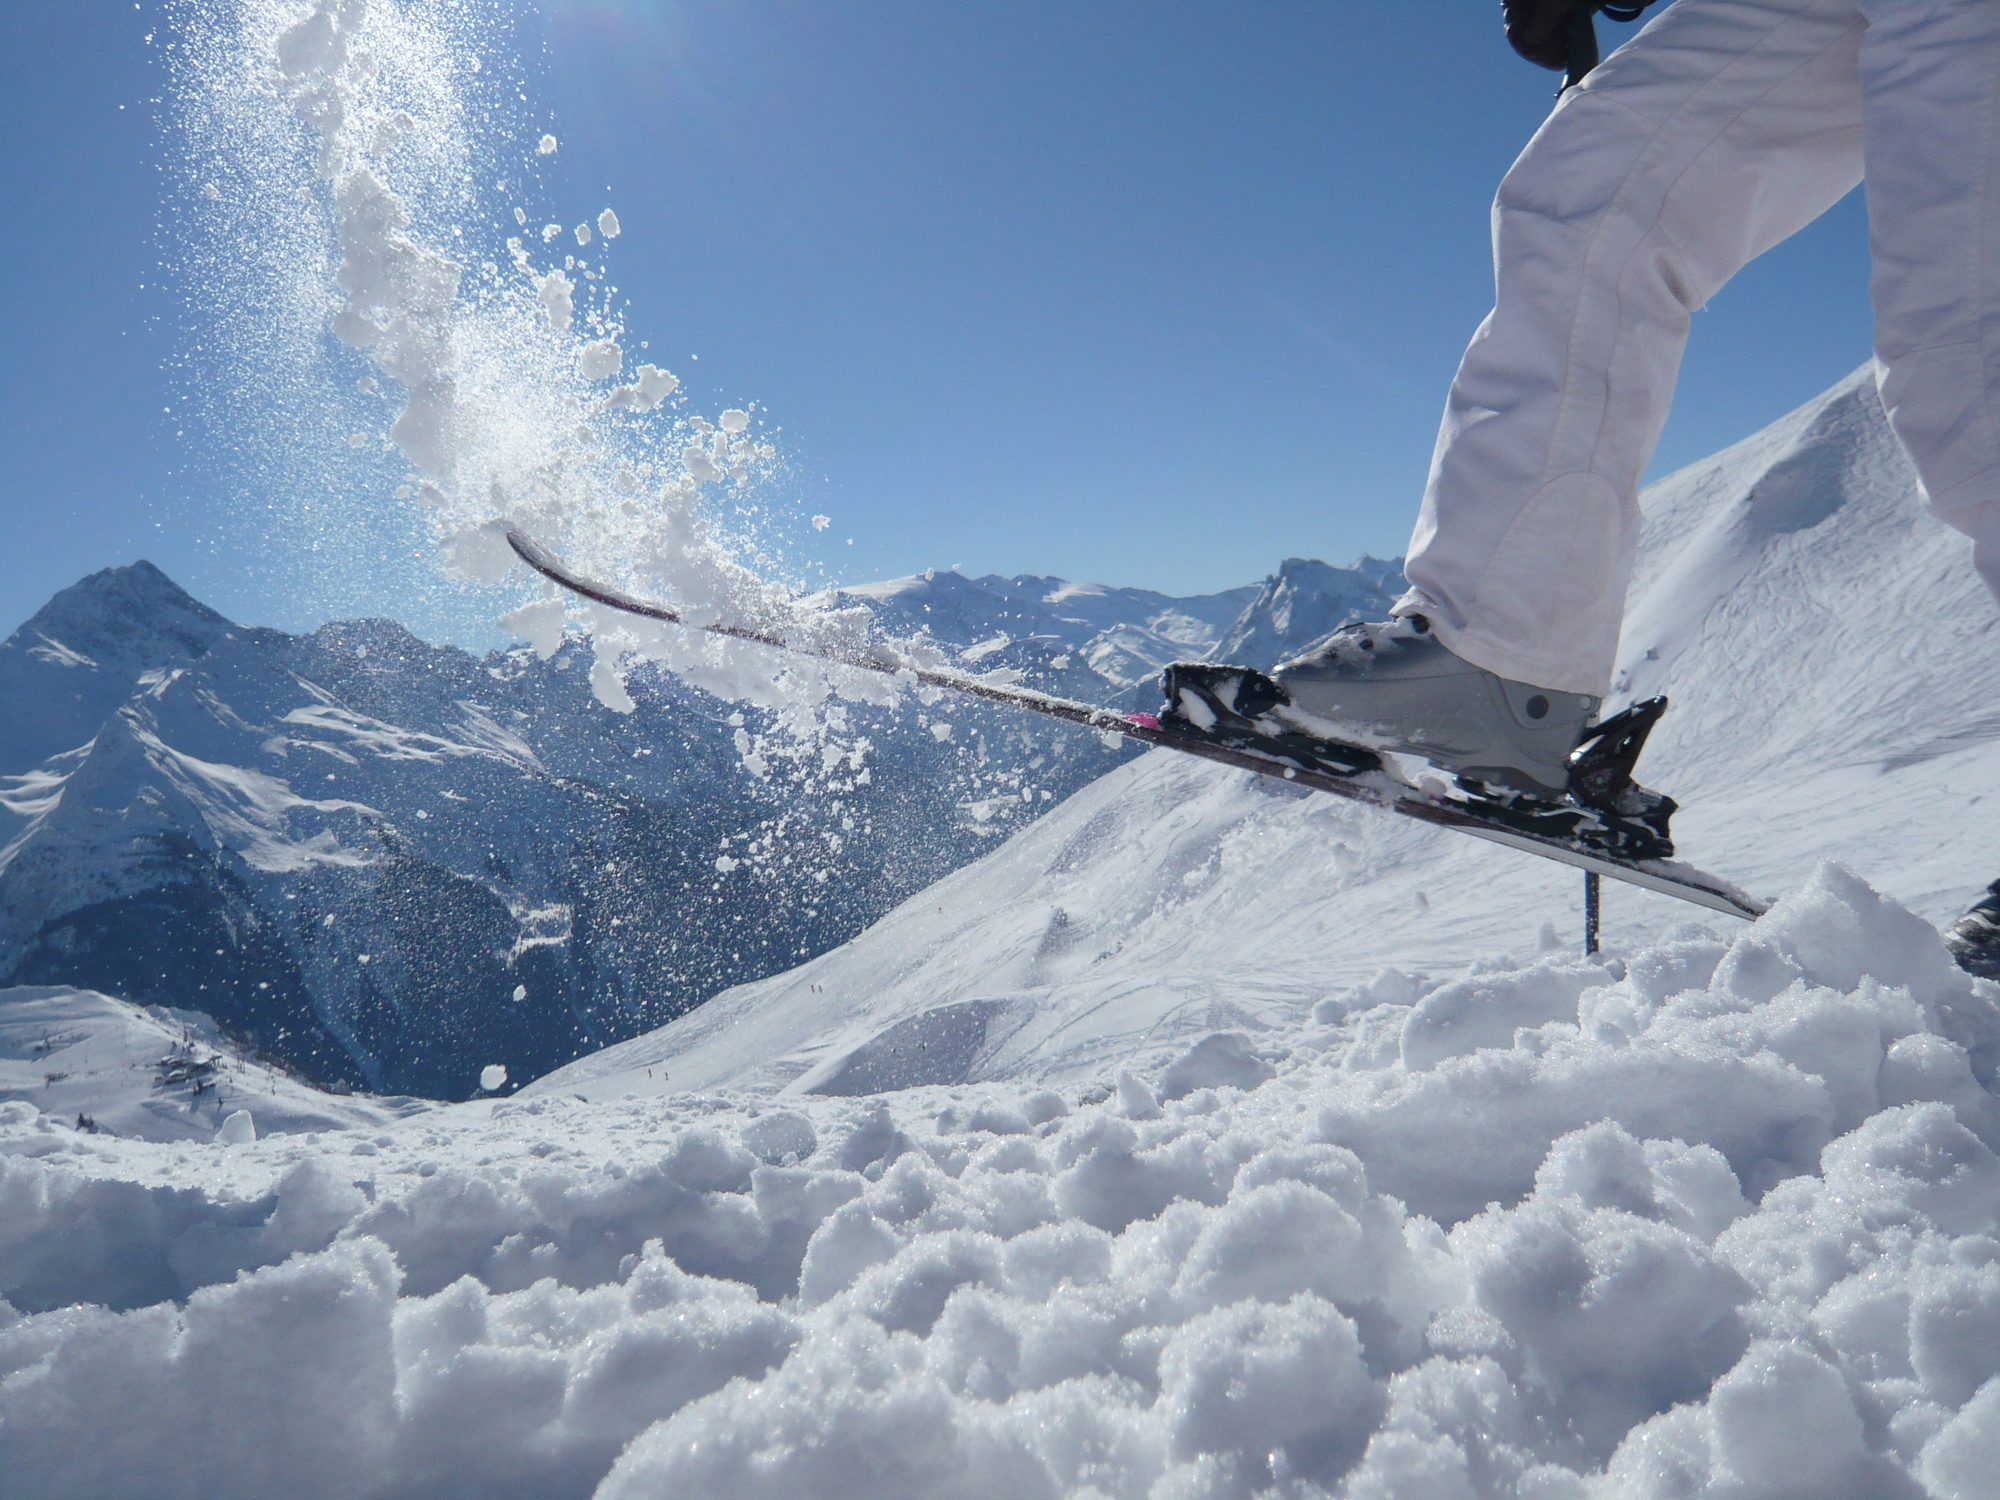 Get a $300 Delta Air Lines gift card when you book select Park City, Utah ski resorts!